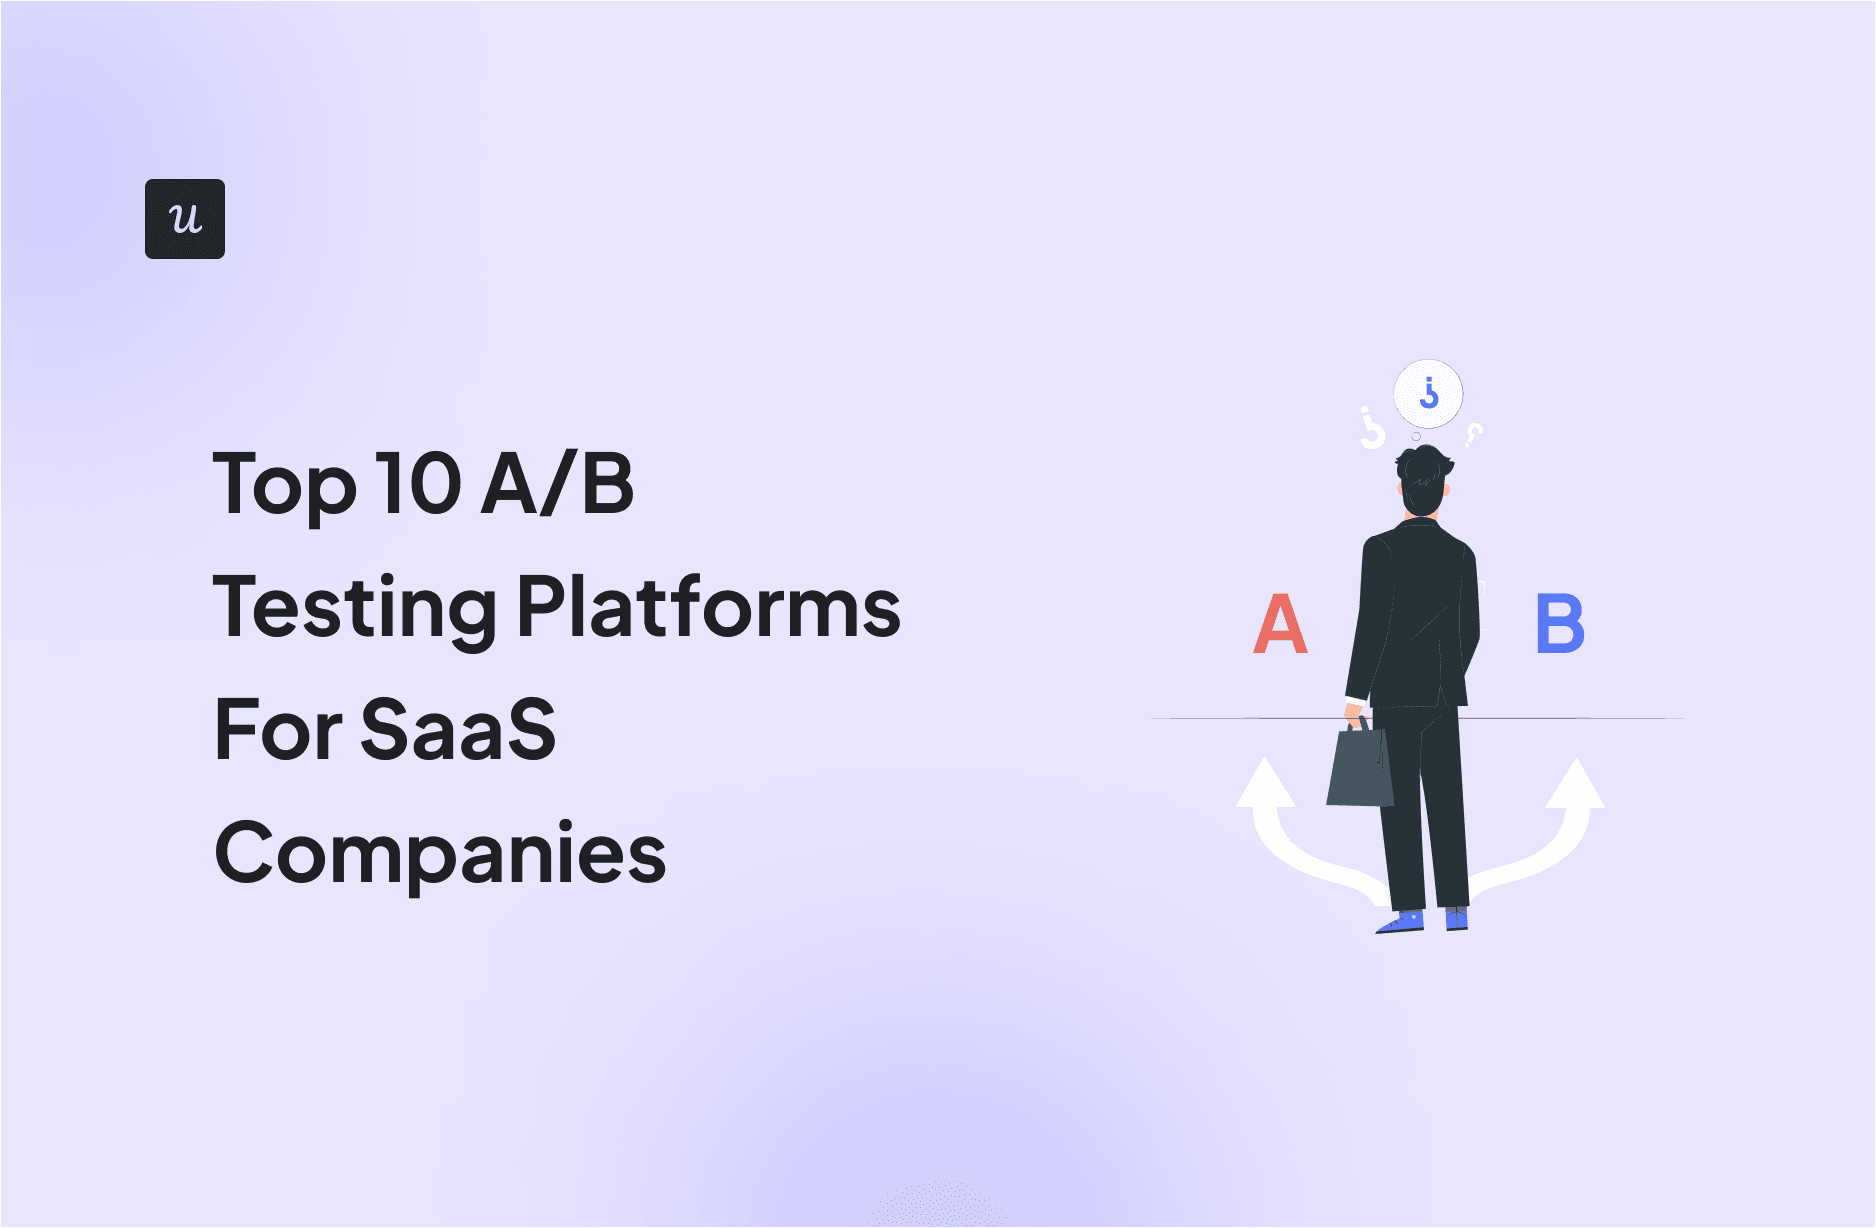 Top 10 A/B Testing Platforms For SaaS Companies cover